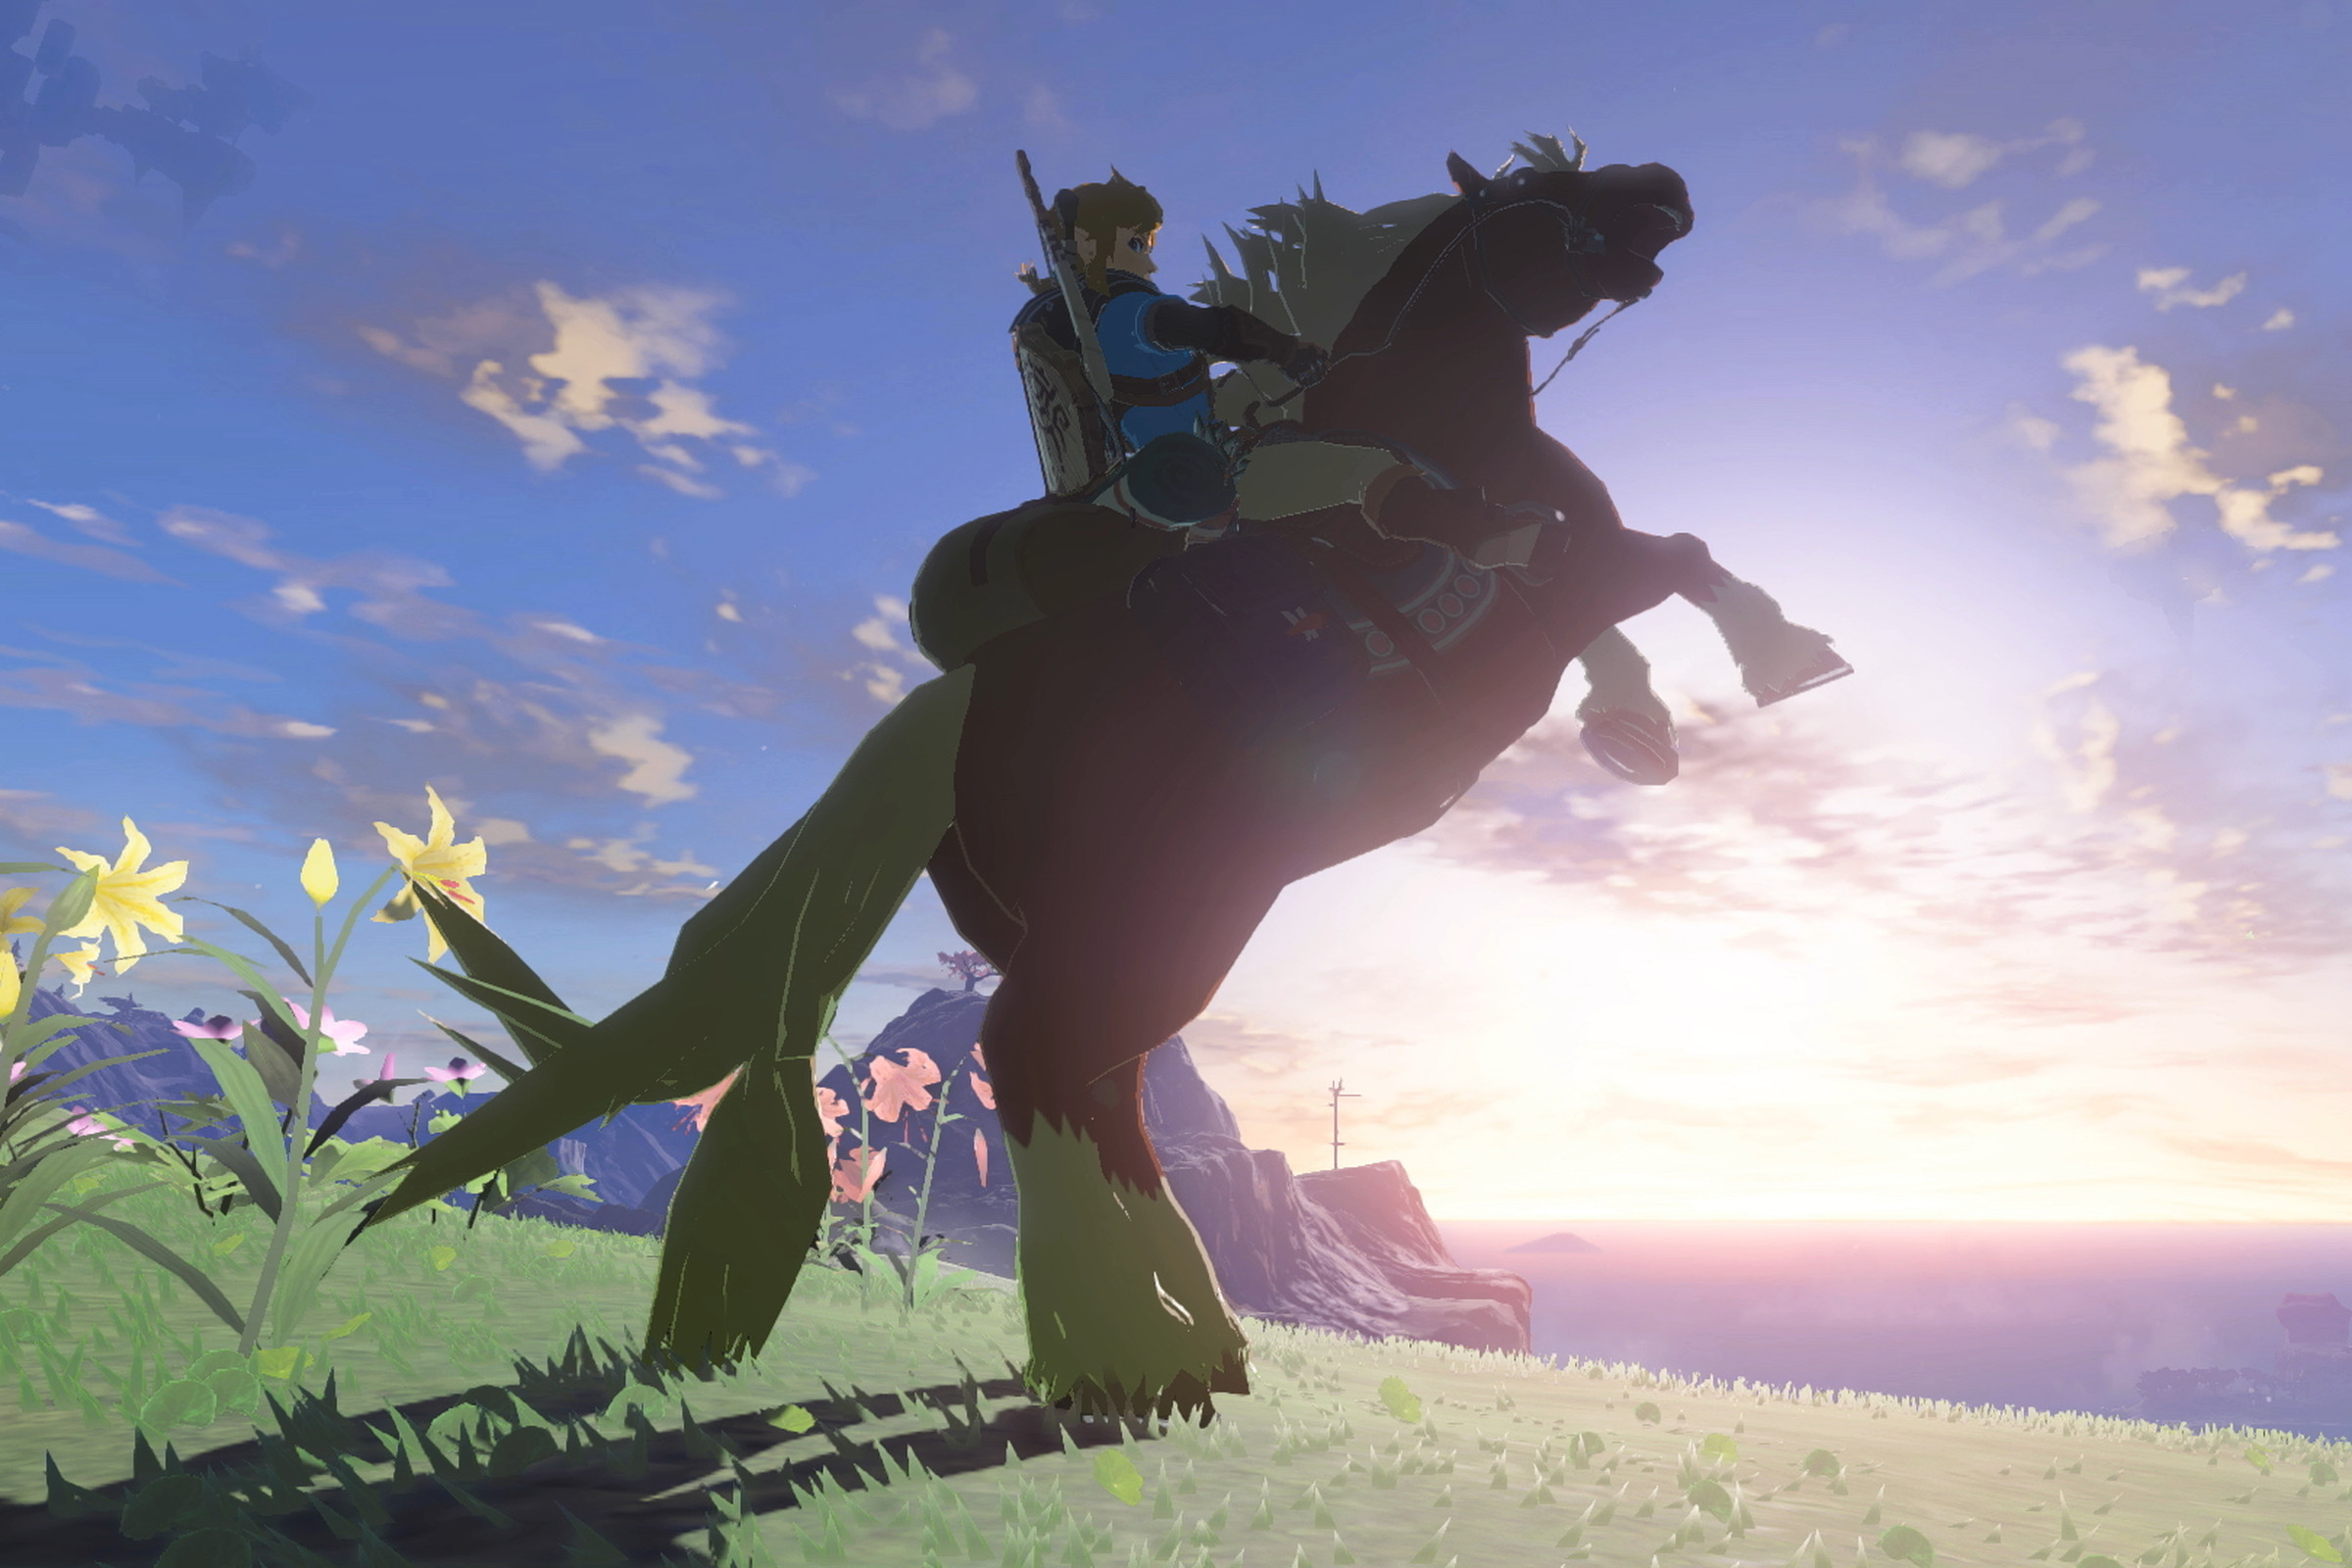 In a screenshot from The Legend of Zelda: Tears of the Kingdom, Link rides a horse in front of a sun-filled horizon.